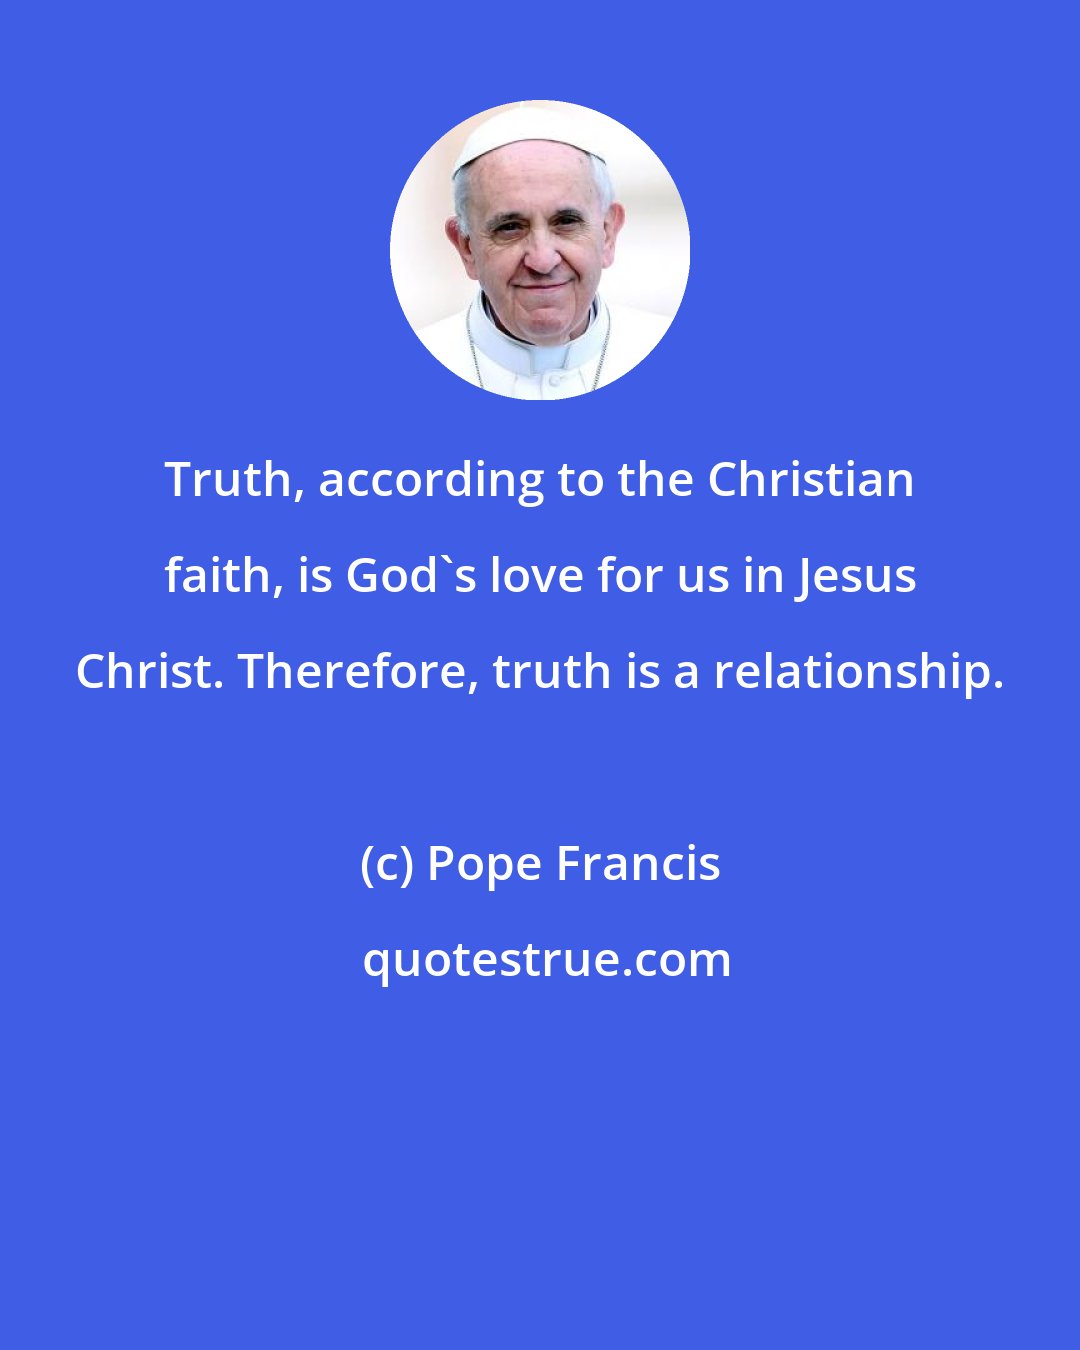 Pope Francis: Truth, according to the Christian faith, is God's love for us in Jesus Christ. Therefore, truth is a relationship.